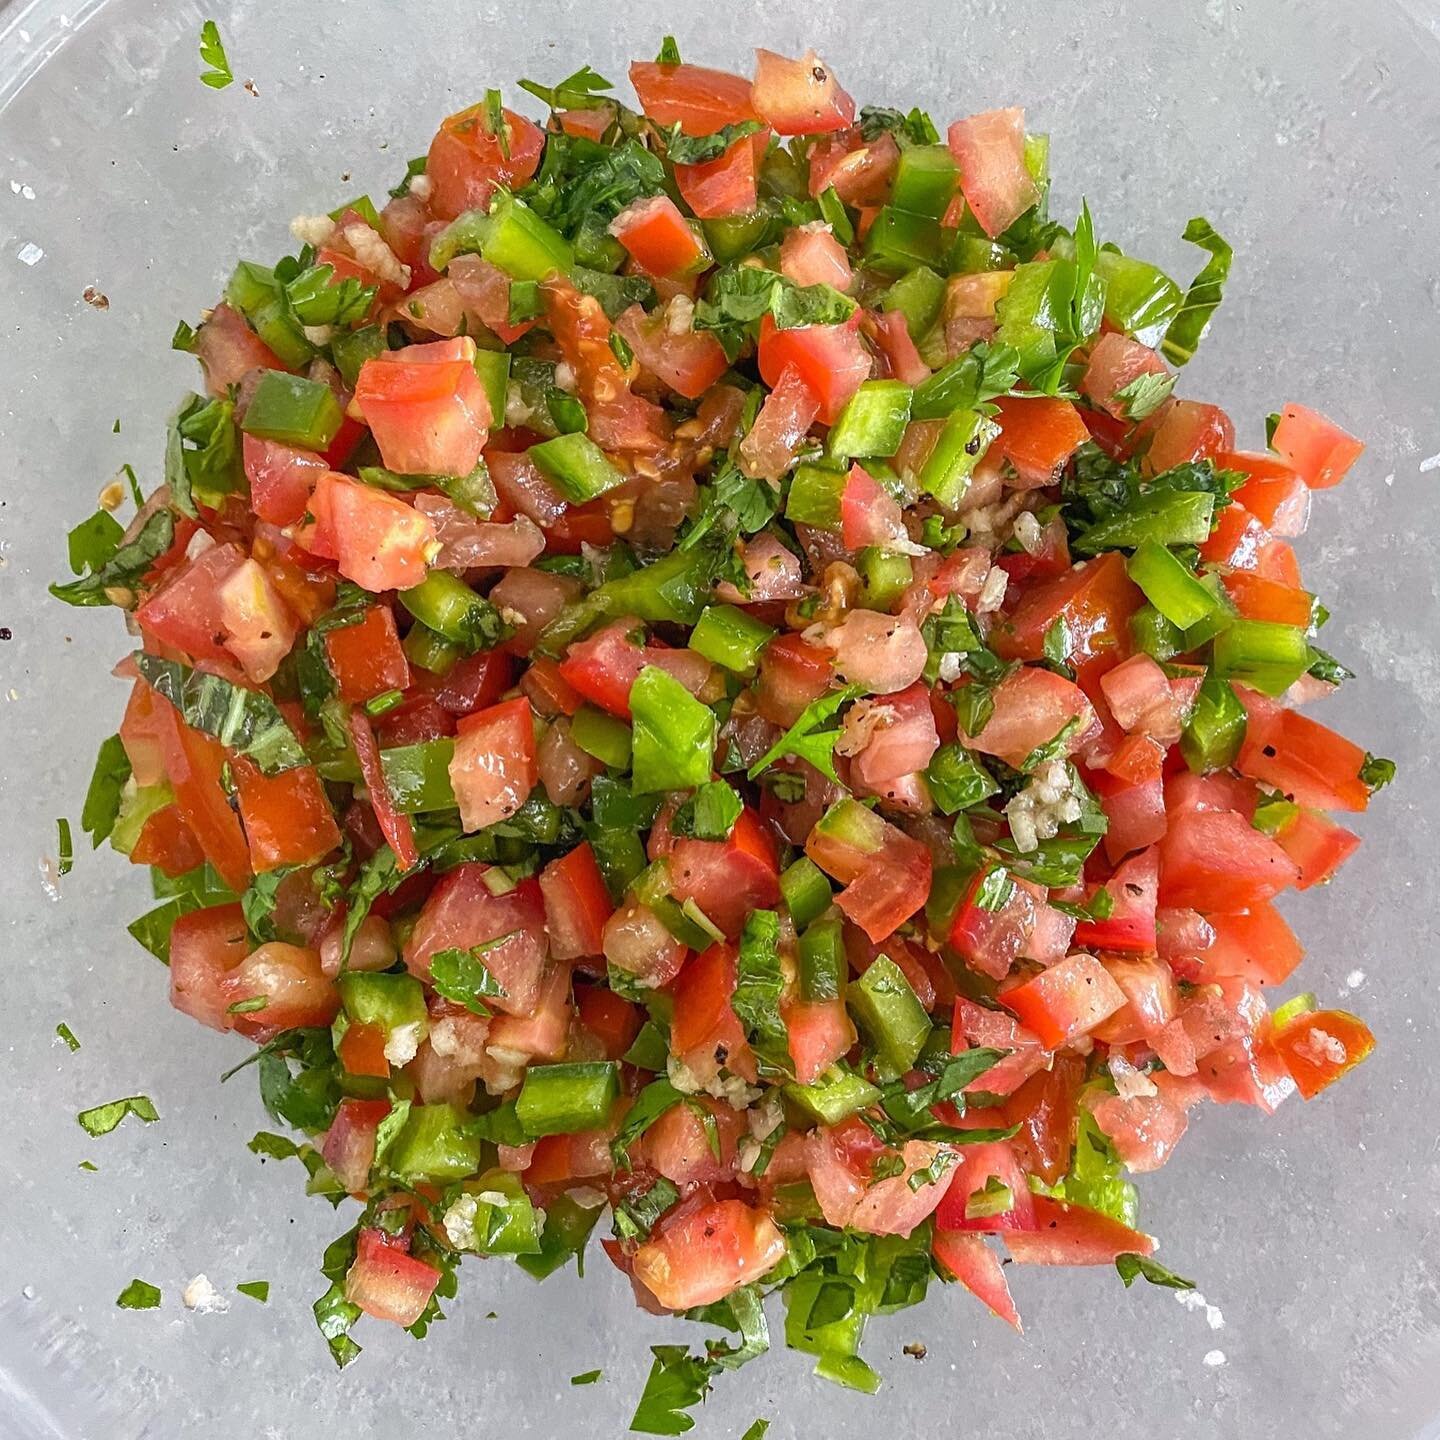 Salsa Cruda 🍅🇮🇹🌱It's like pico de gallo, but Italian. Amazing on fish, but you can really use this however you'd like! Fresh, simple recipe here.👇🏼⁠⁠
⁠⁠
🍅Salsa Cruda Recipe:⁠⁠
- about 2 cups diced tomatoes⁠⁠
- 1 green bell pepper, diced⁠⁠
- 2-